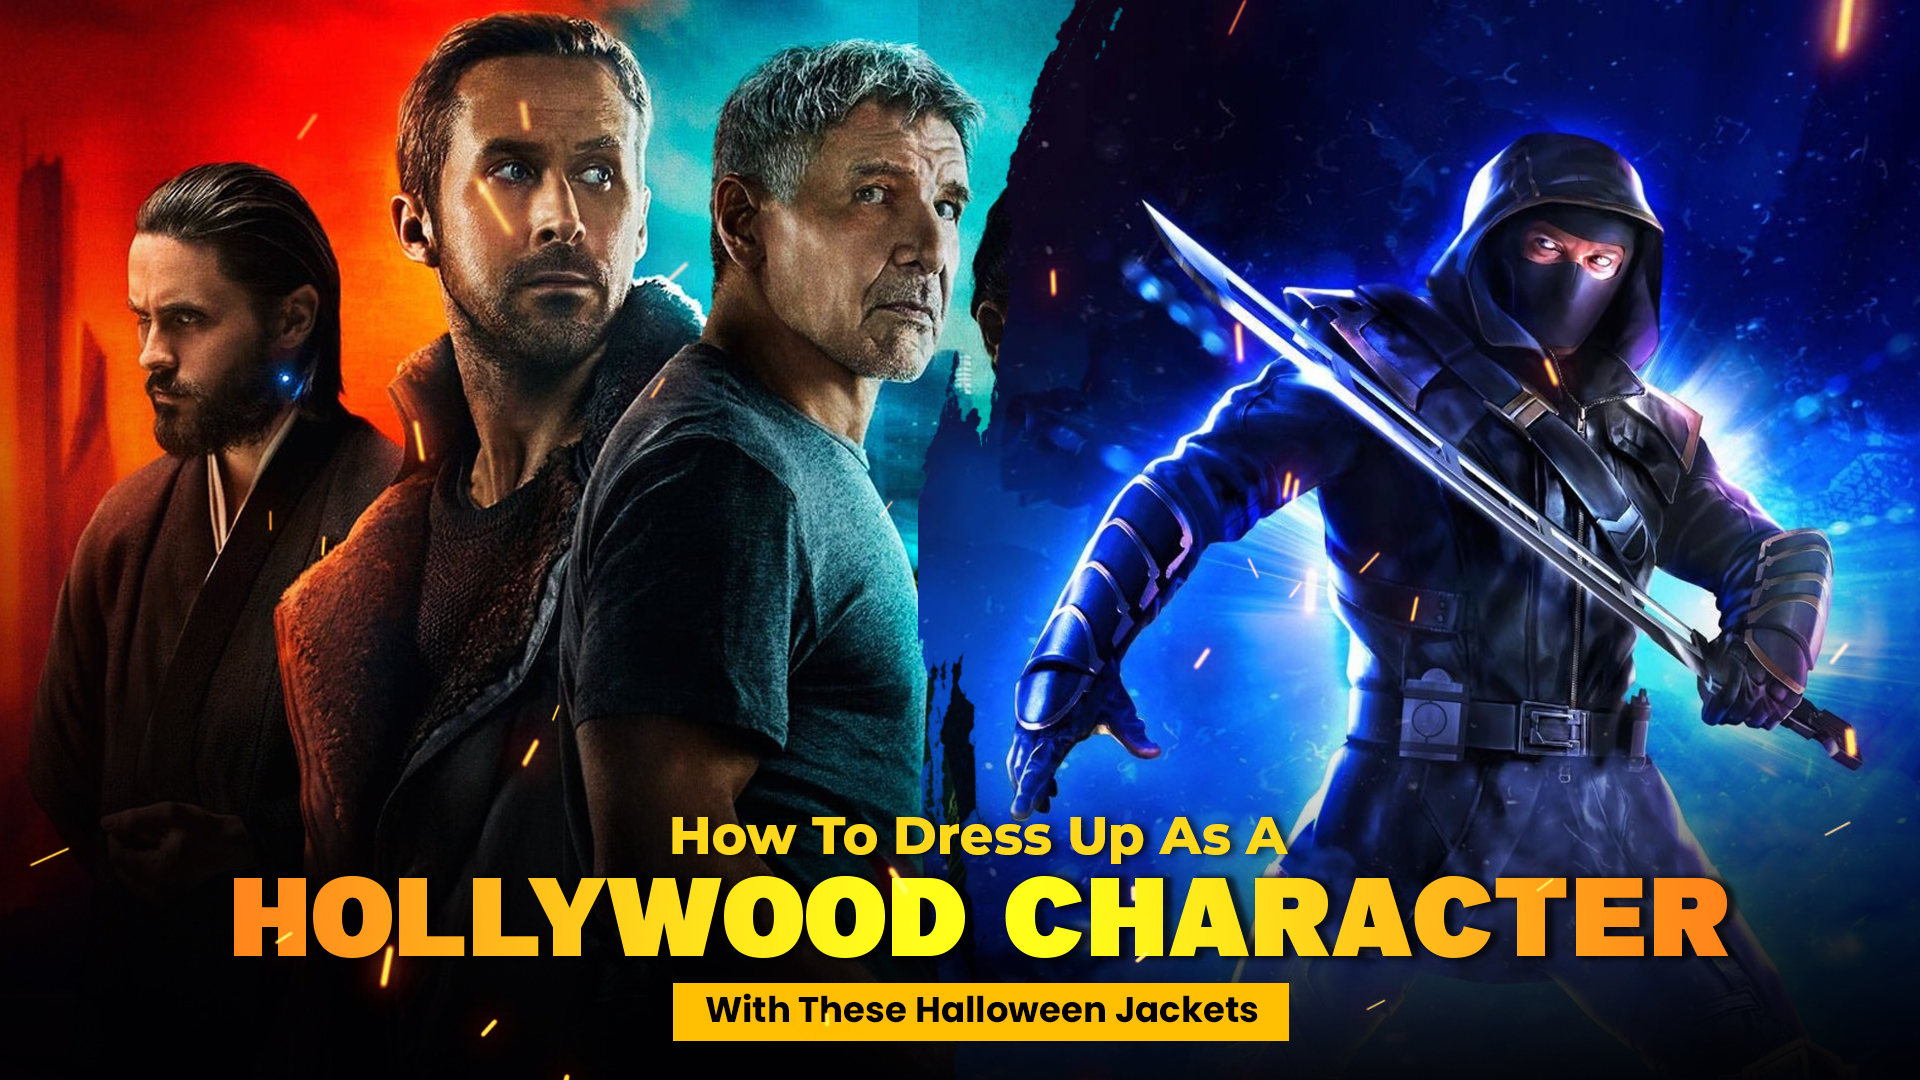 How To Dress Up As A Hollywood Character With These Halloween